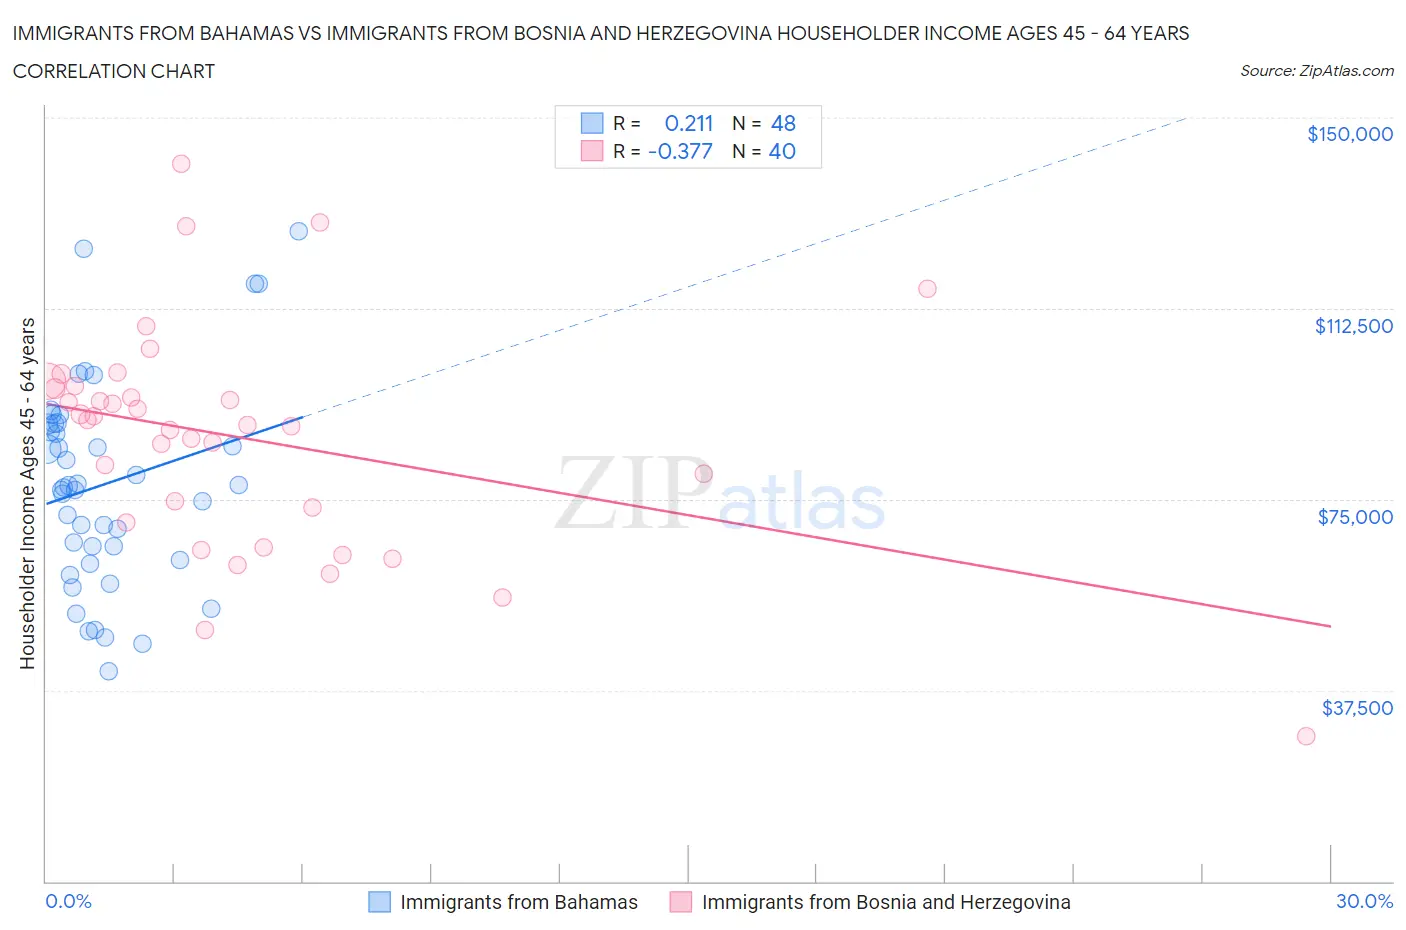 Immigrants from Bahamas vs Immigrants from Bosnia and Herzegovina Householder Income Ages 45 - 64 years